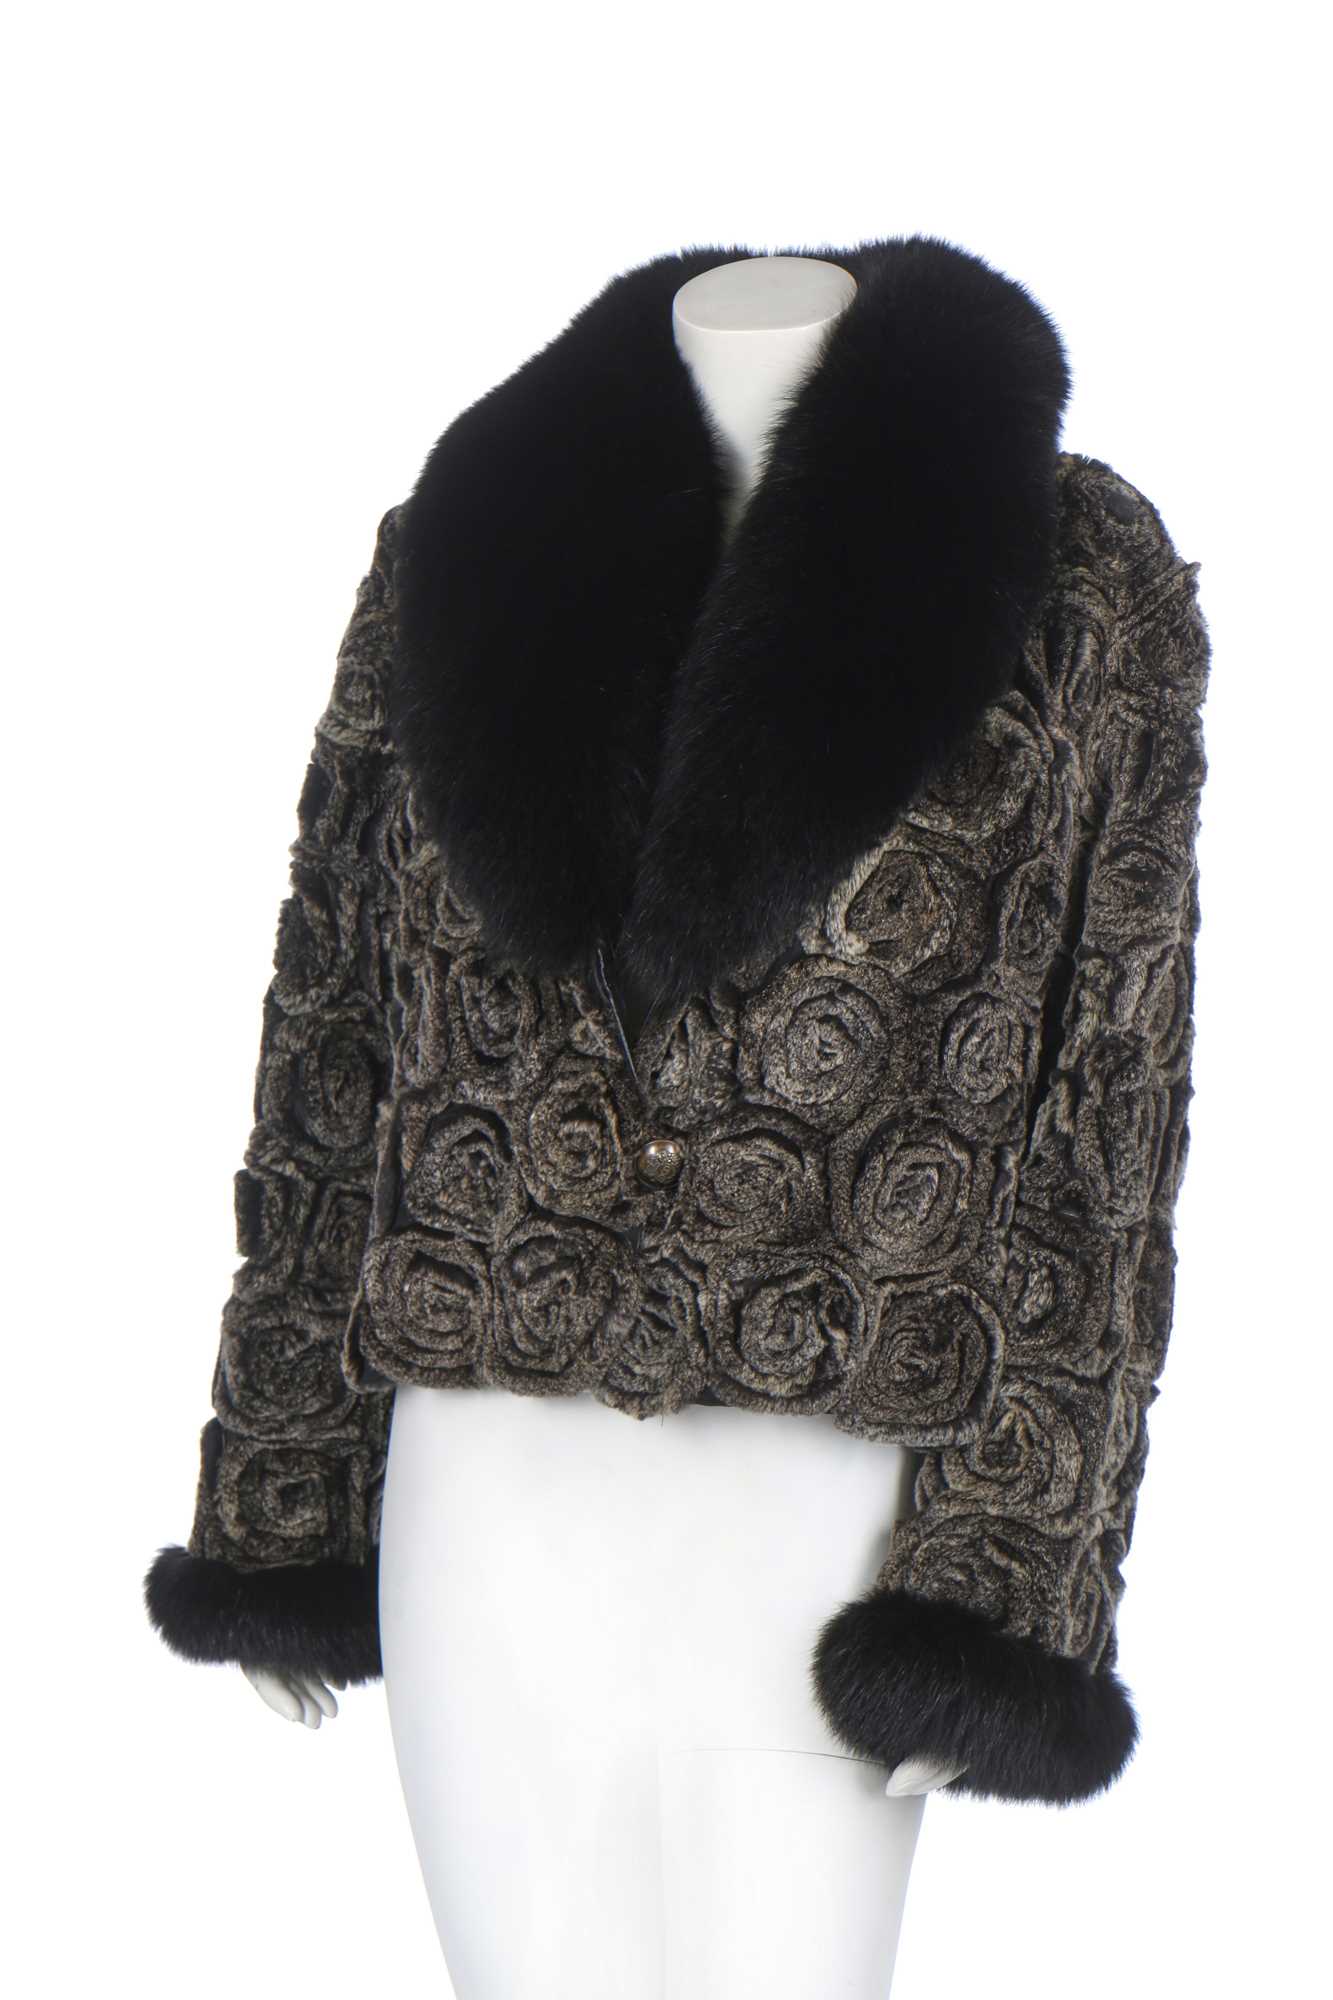 Lot 95 - A shaved rabbit fur jacket with fox fur collar and cuffs, modern